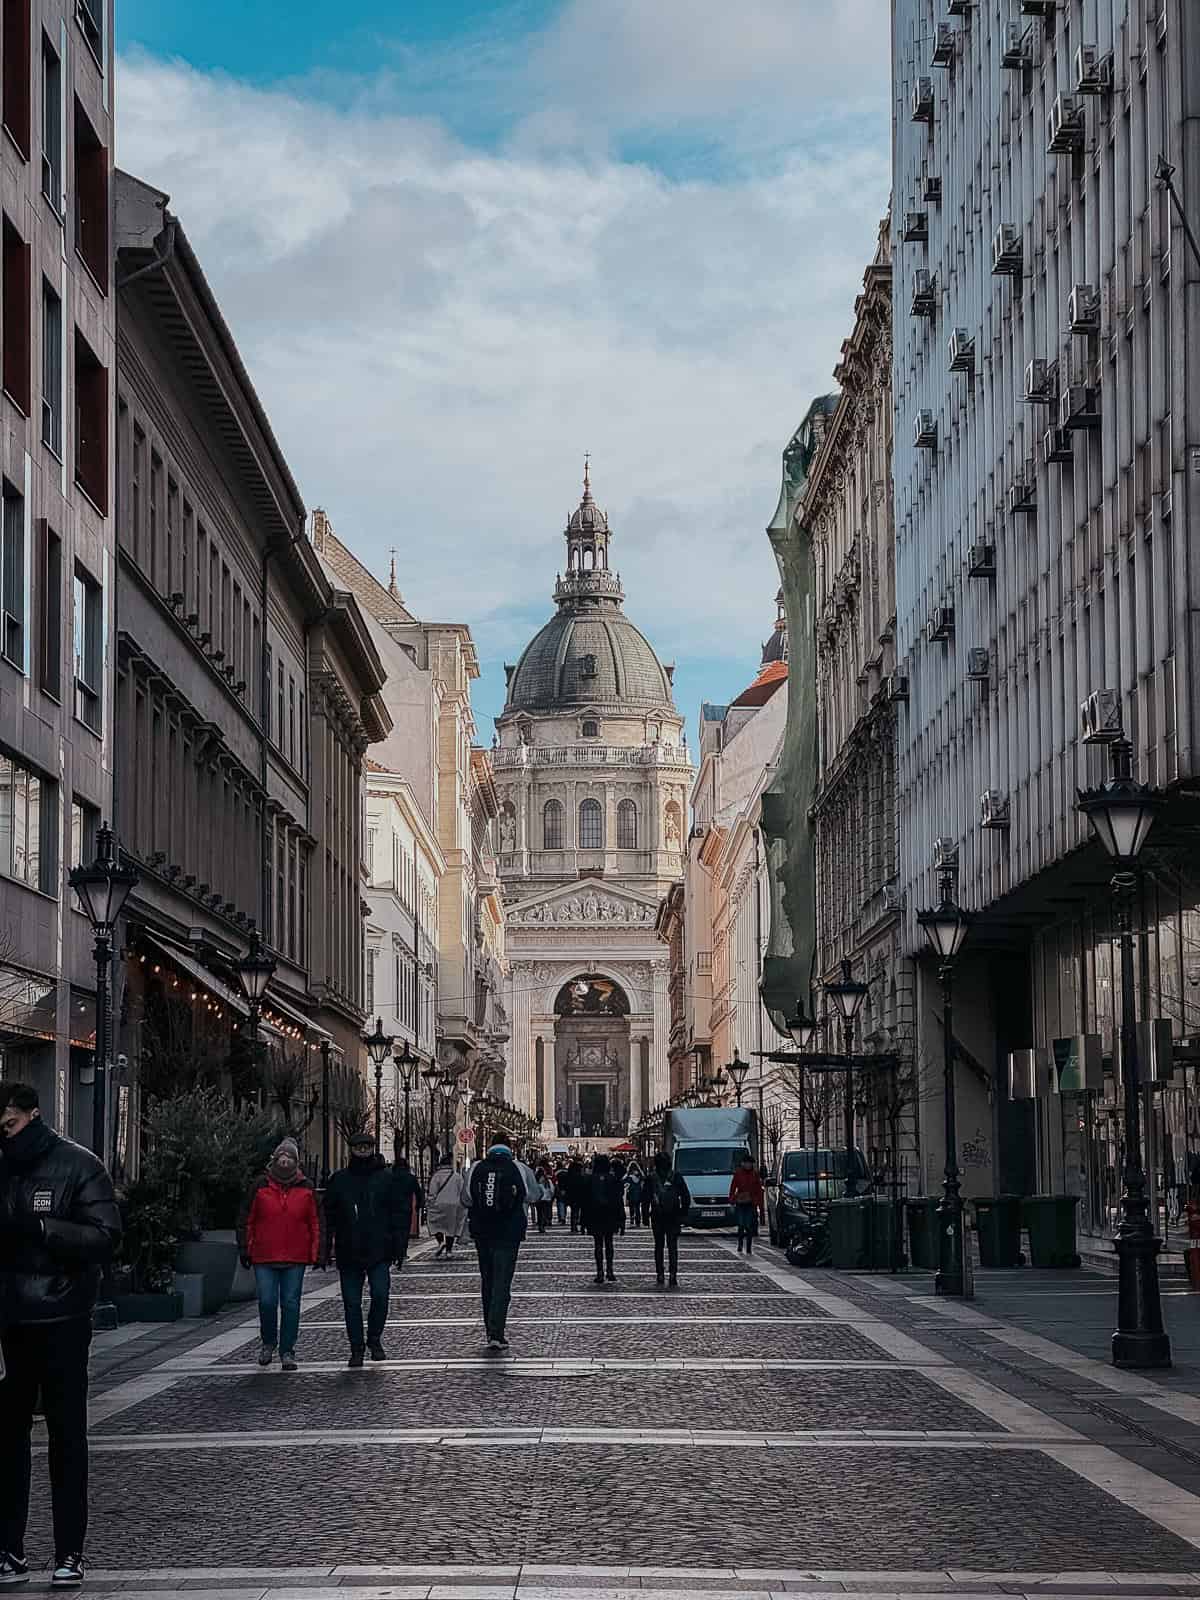 A bustling street in Budapest leading to St. Stephen's Basilica, lined with buildings and people walking, under a partly cloudy sky.